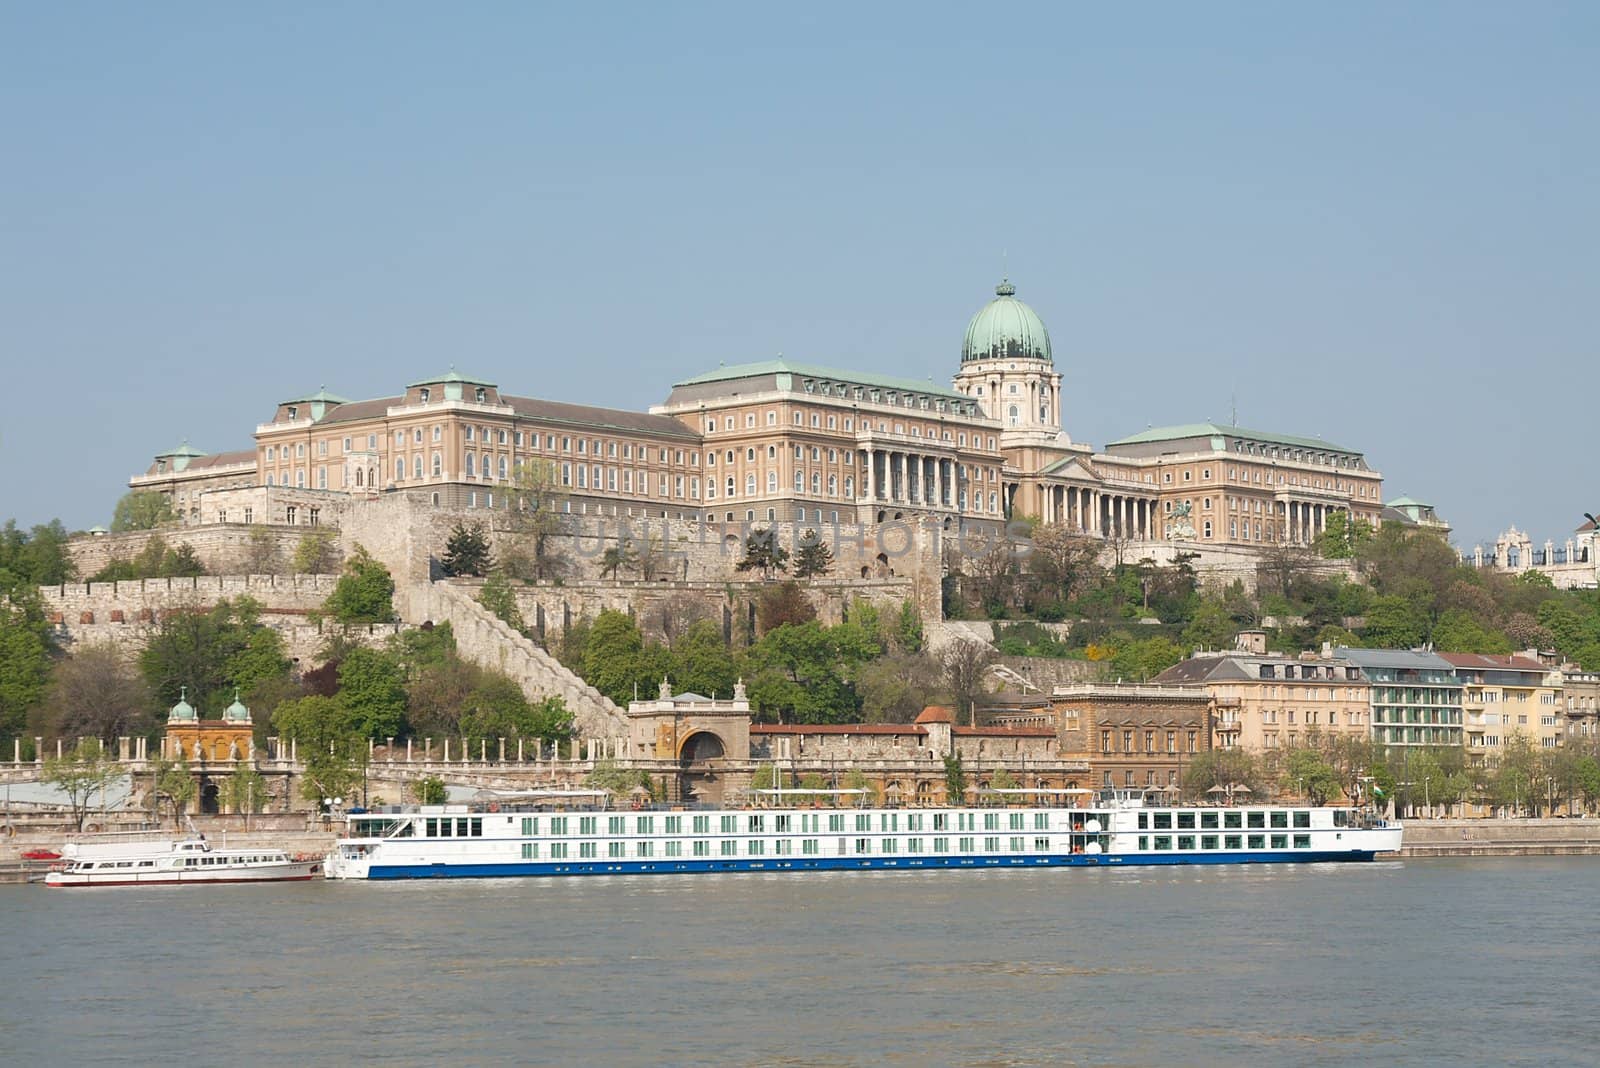 Castle of Buda in Budapest with the river Danube